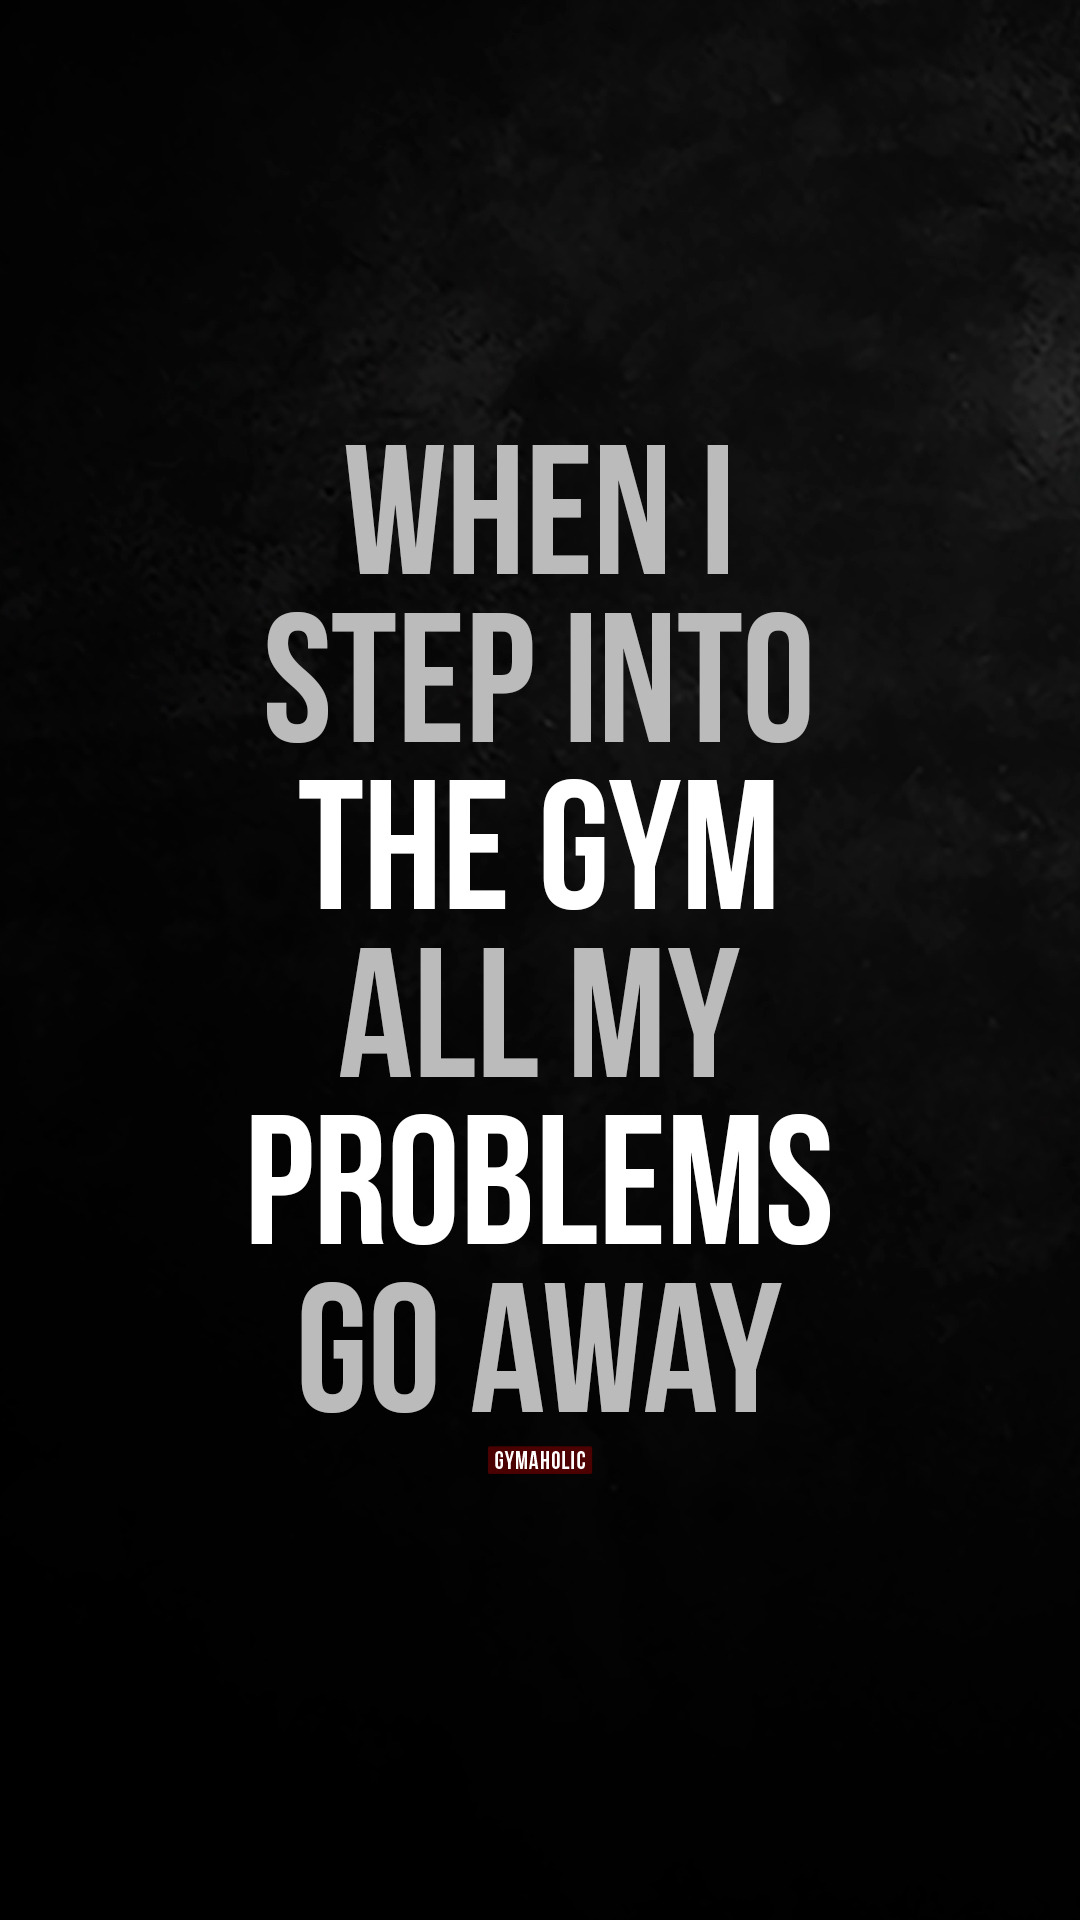 When I step into that gym all my problems go away